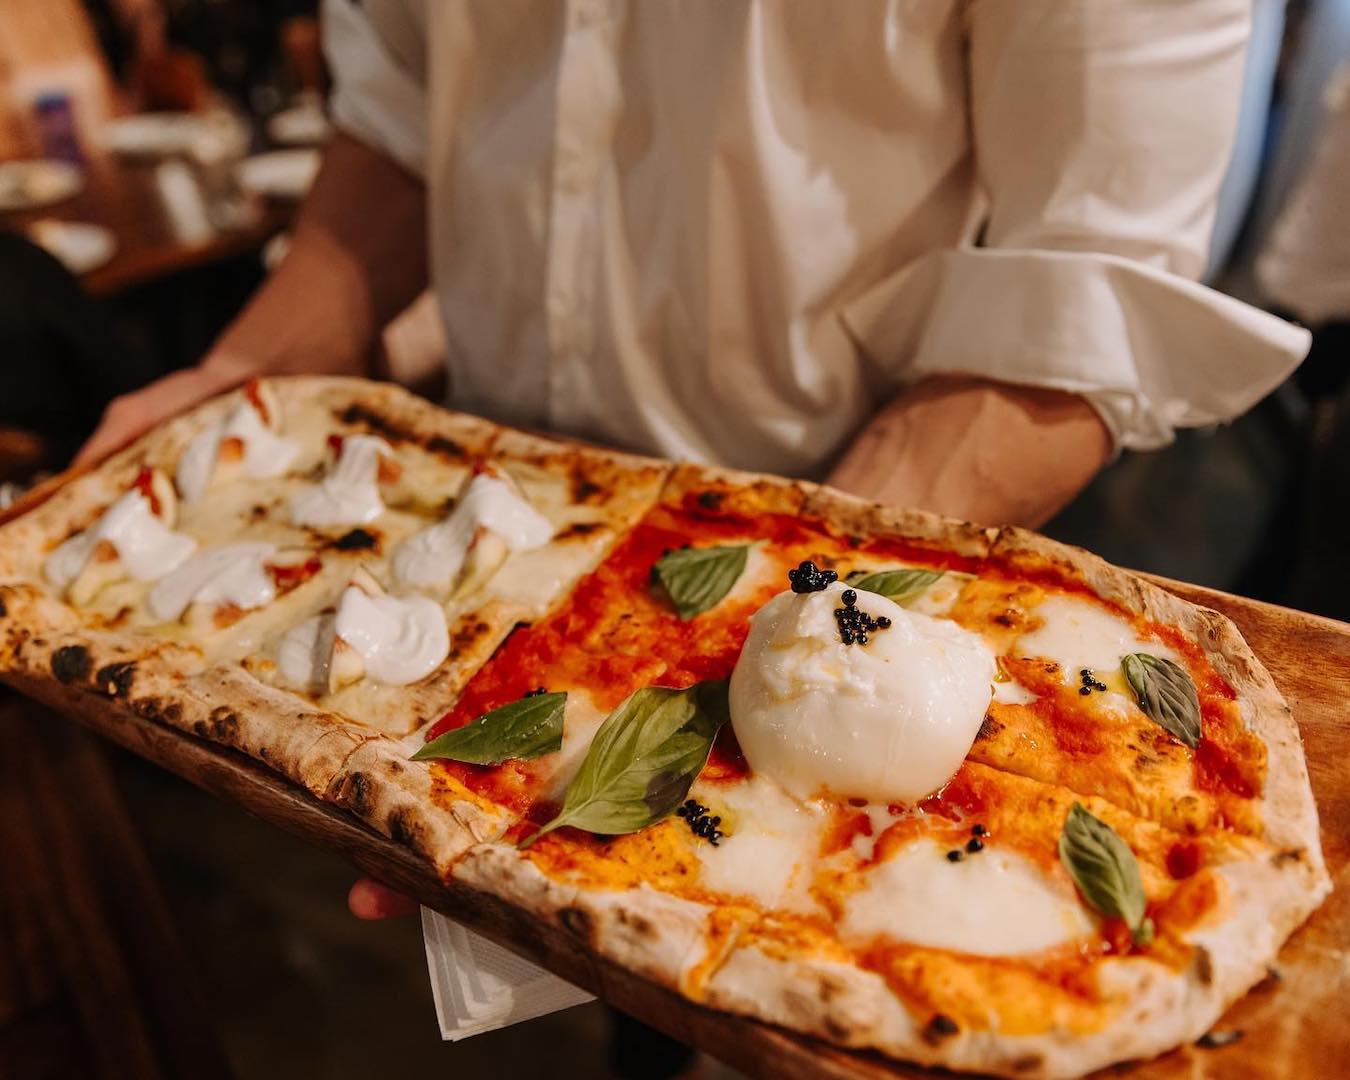 A large pizza topped with a ball of burrata cheese.